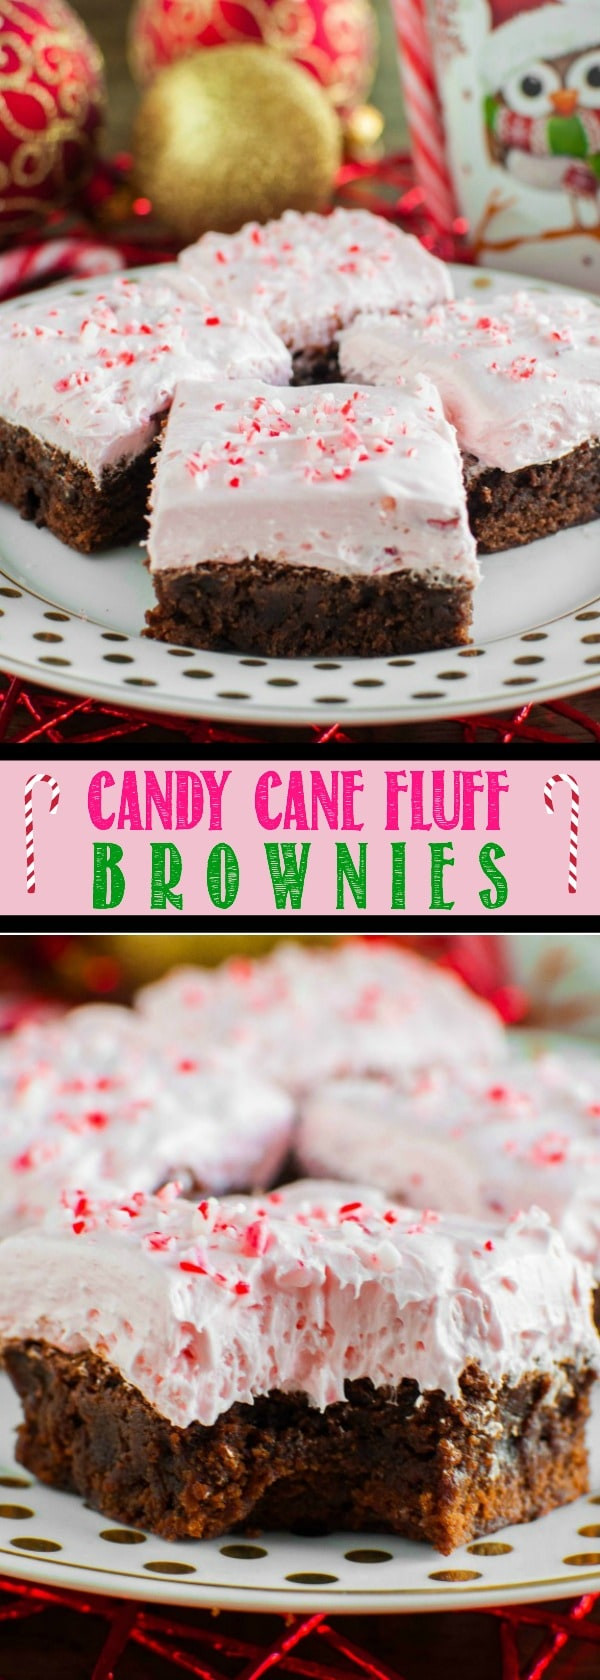 Light Christmas Desserts
 Candy Cane Fluff Brownies Back for Seconds